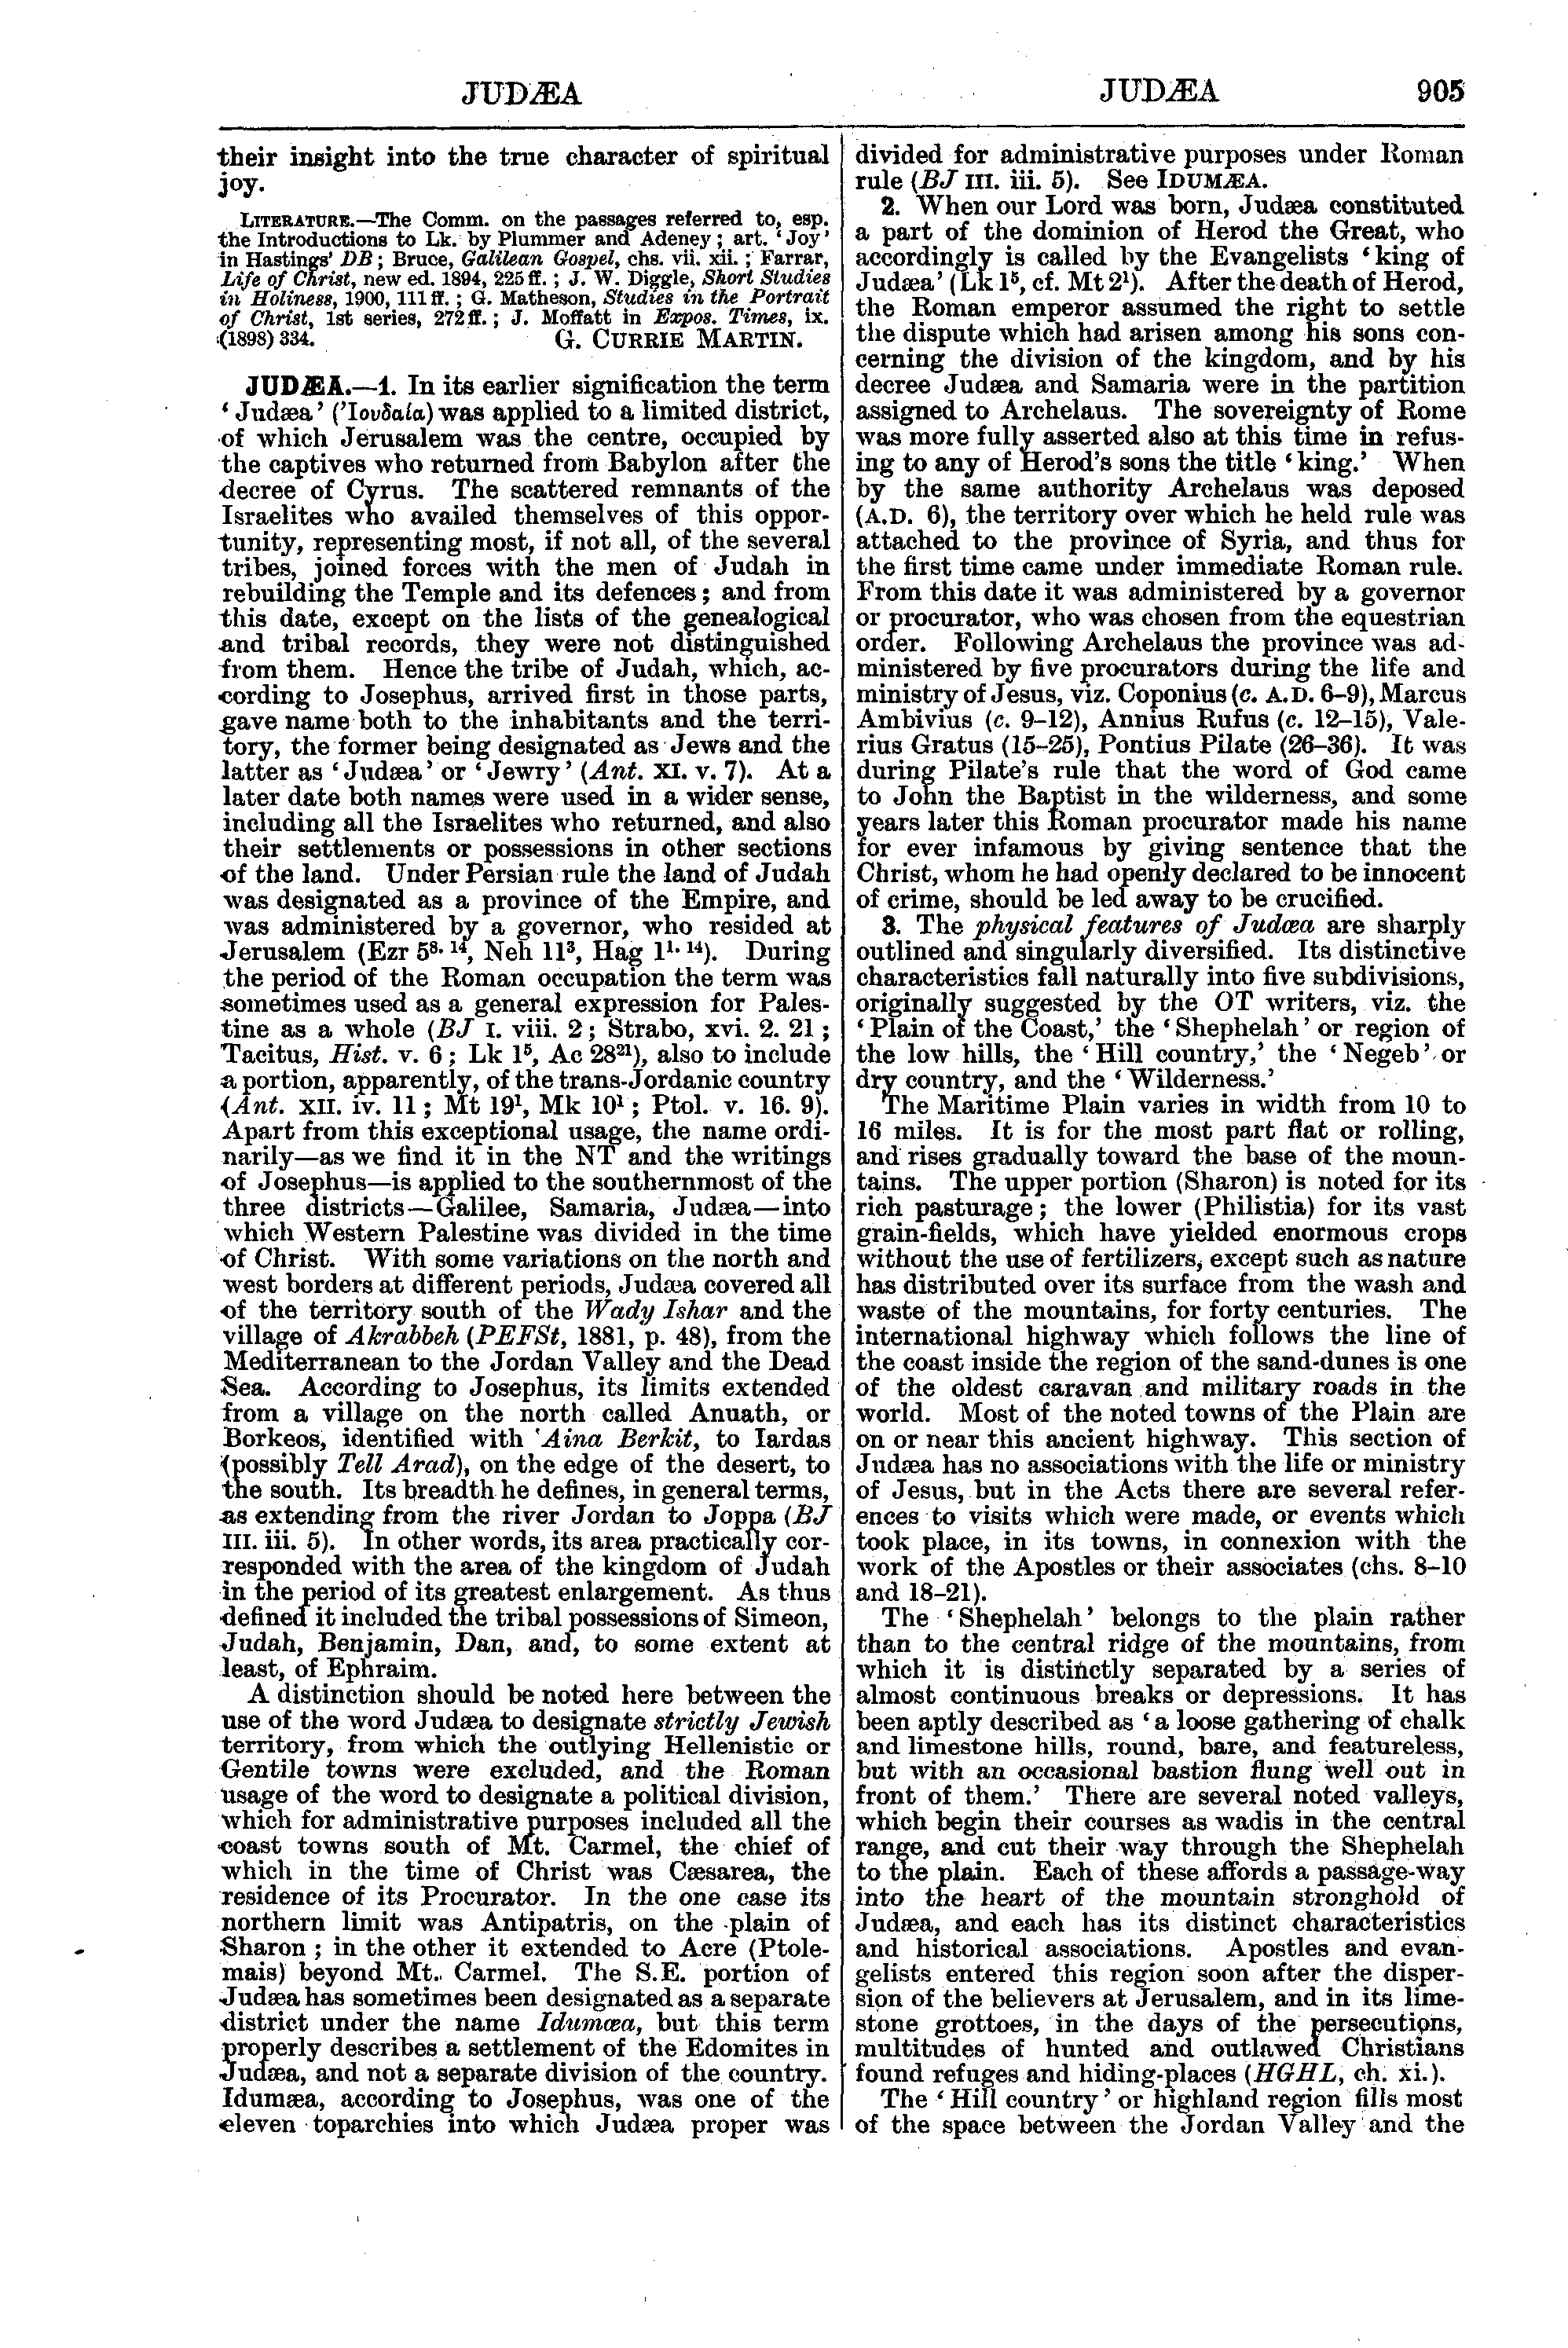 Image of page 905